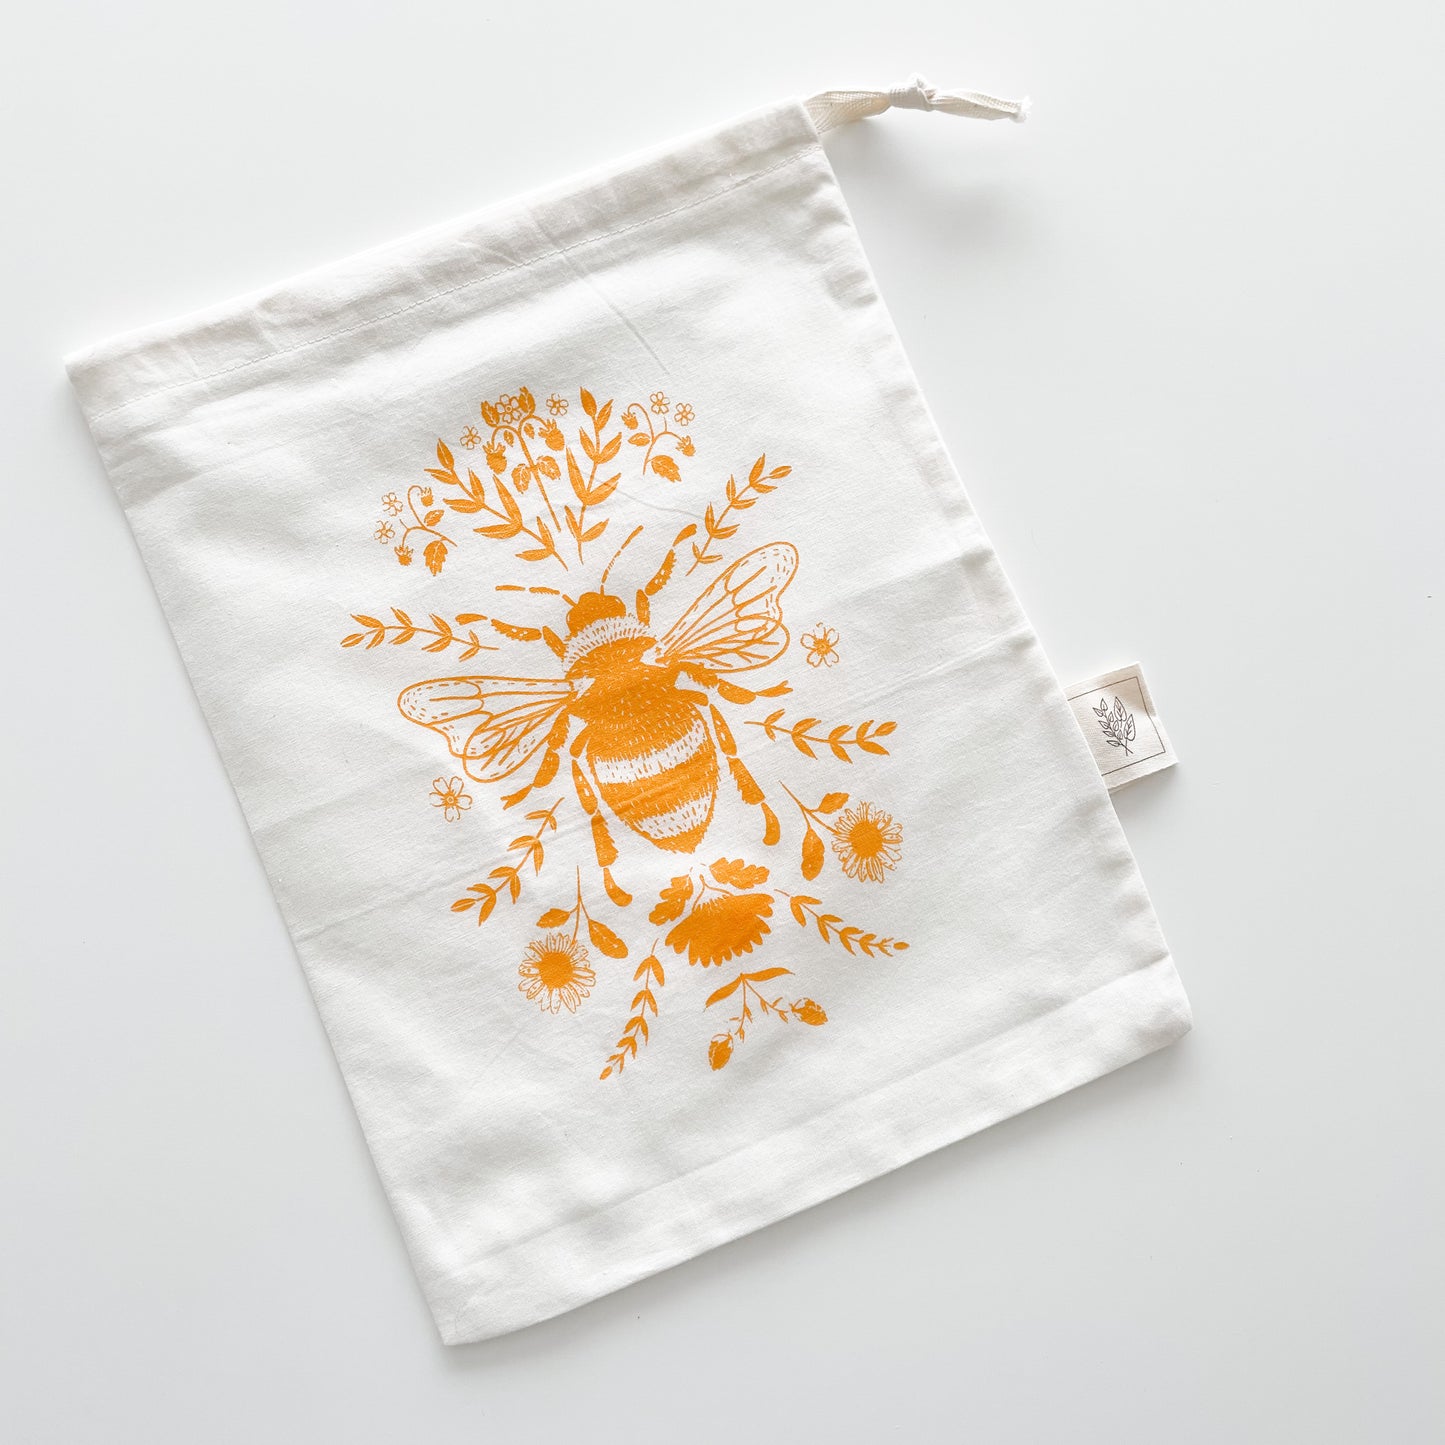 Cotton Produce/Gift Bags - Bees